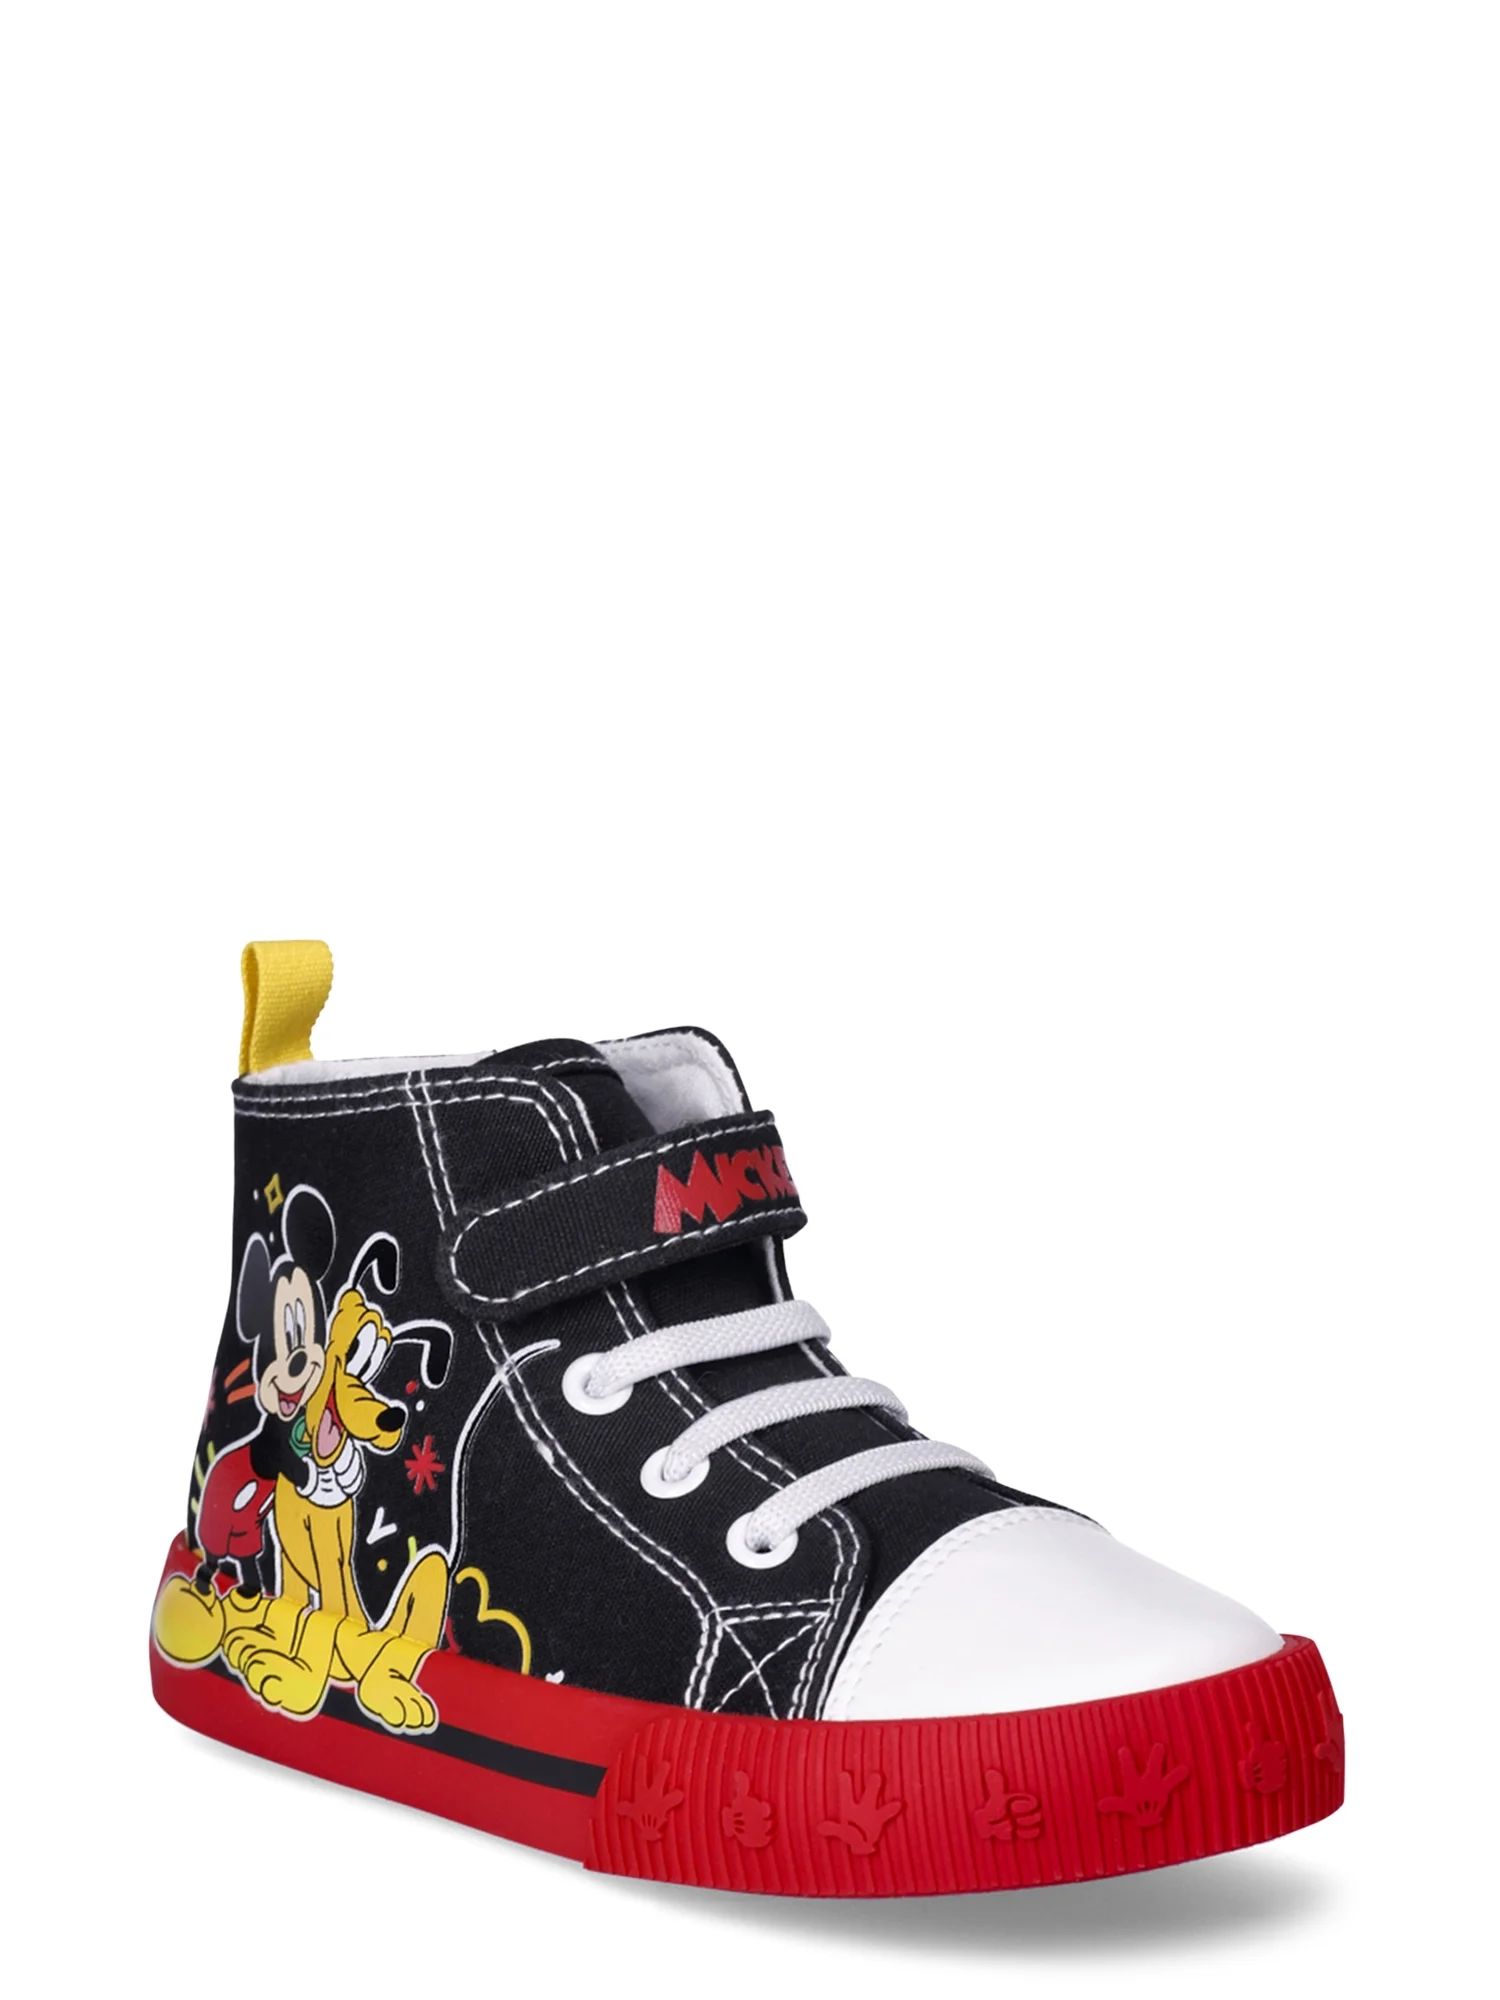 Mickey Mouse Toddler Boys Black Casual Hi Top Sneakers, Sizes 5-12 | Walmart (US)